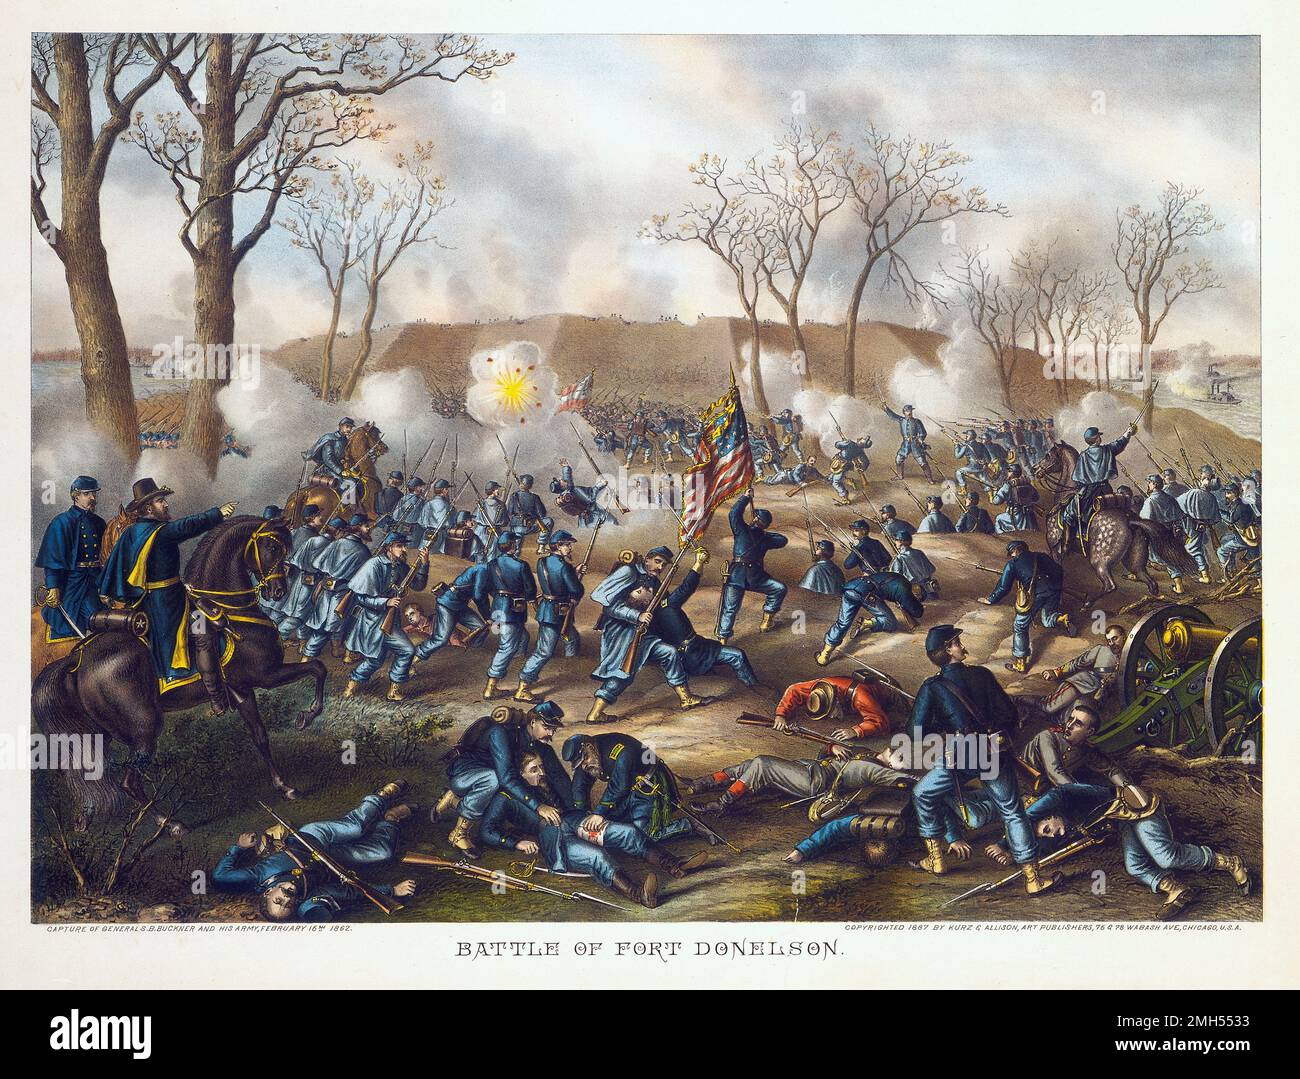 The Battle of Fort Donelson was a battle in the American Civil War fought on 11-12th February 1862 in Kentucky. It was an Unionist amphibious assault on Fort Donelson under the command of Ulysses Grant, and it was a Unionist victory as the fort was captured. Stock Photo